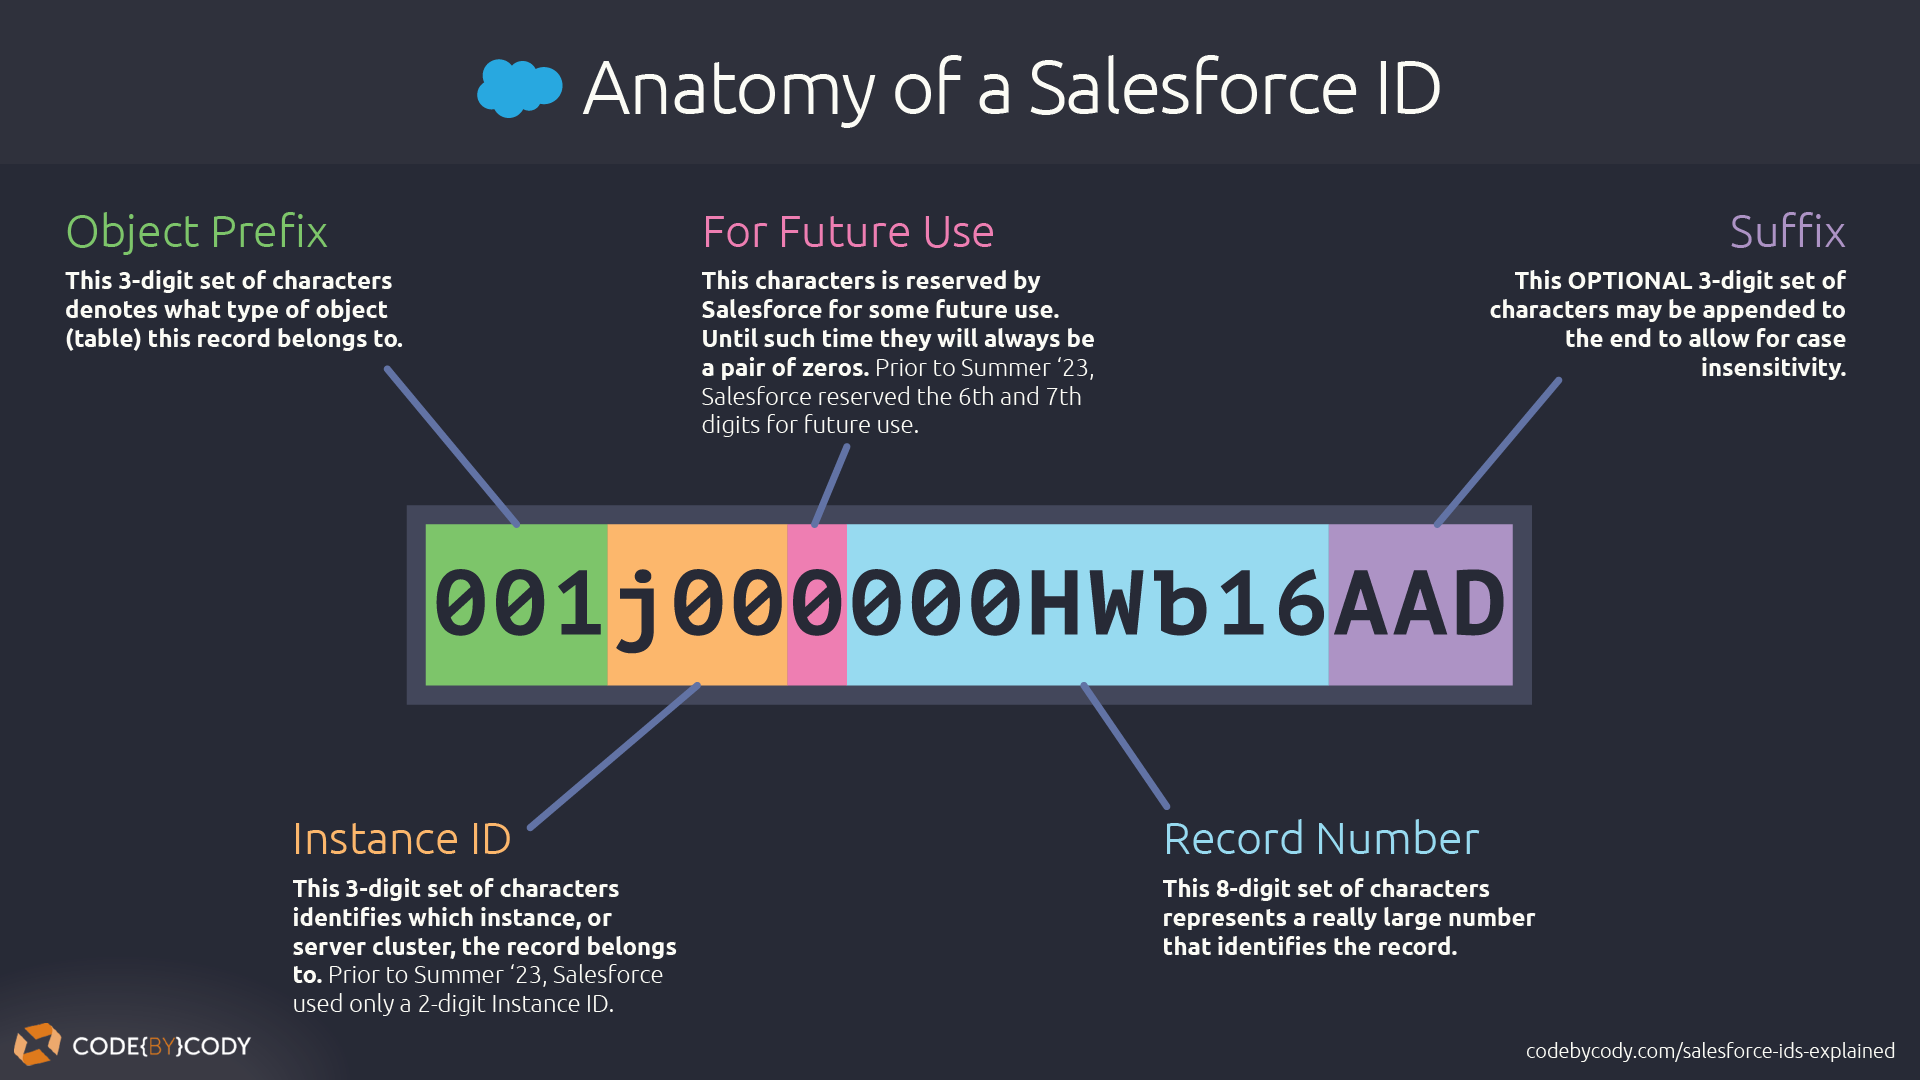 Anatomy of a Salesforce ID Infographic